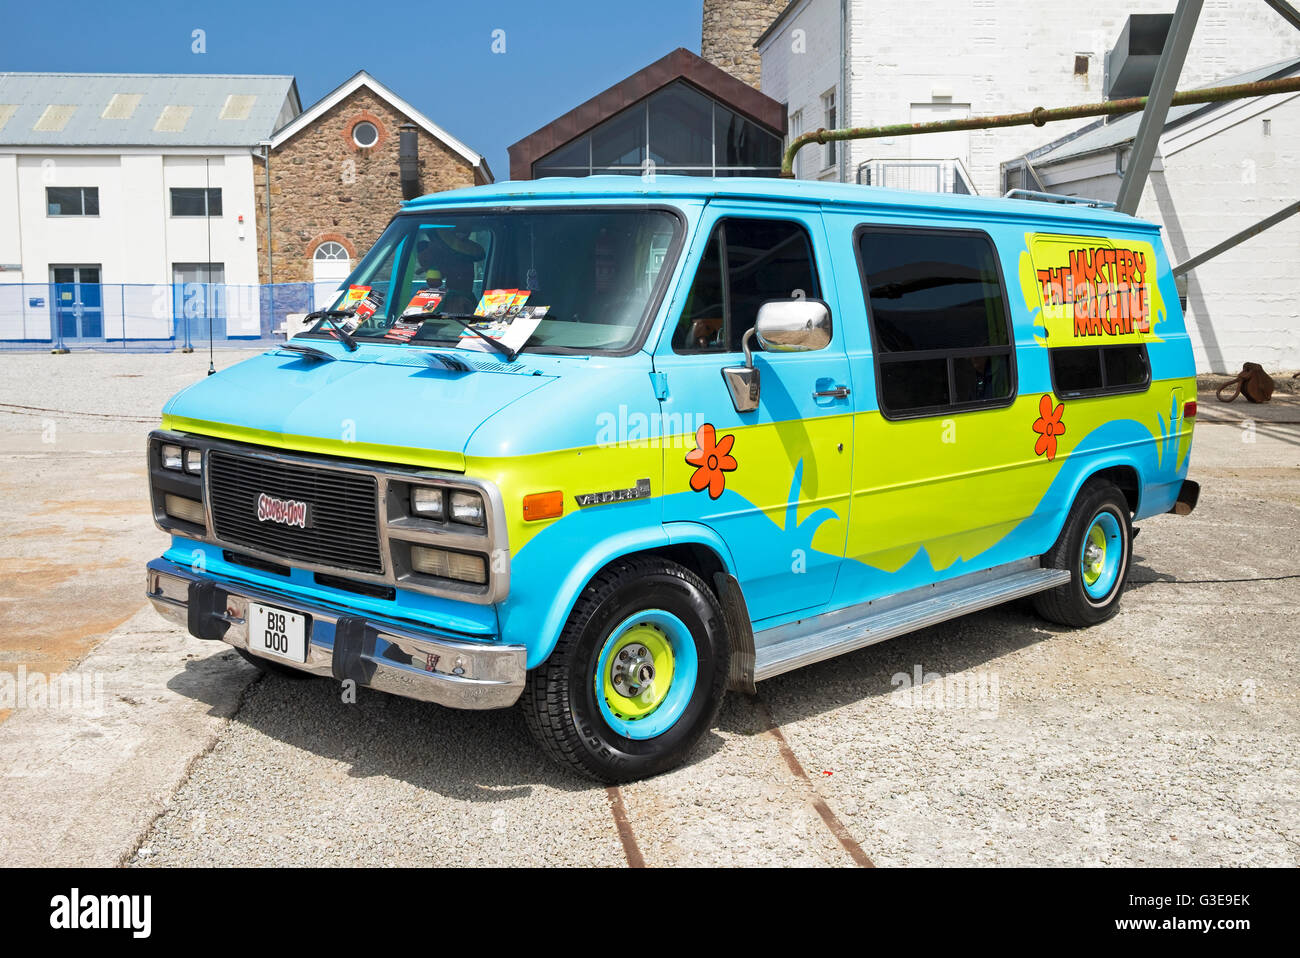 The mystery machine from the scooby doo television programme Stock Photo